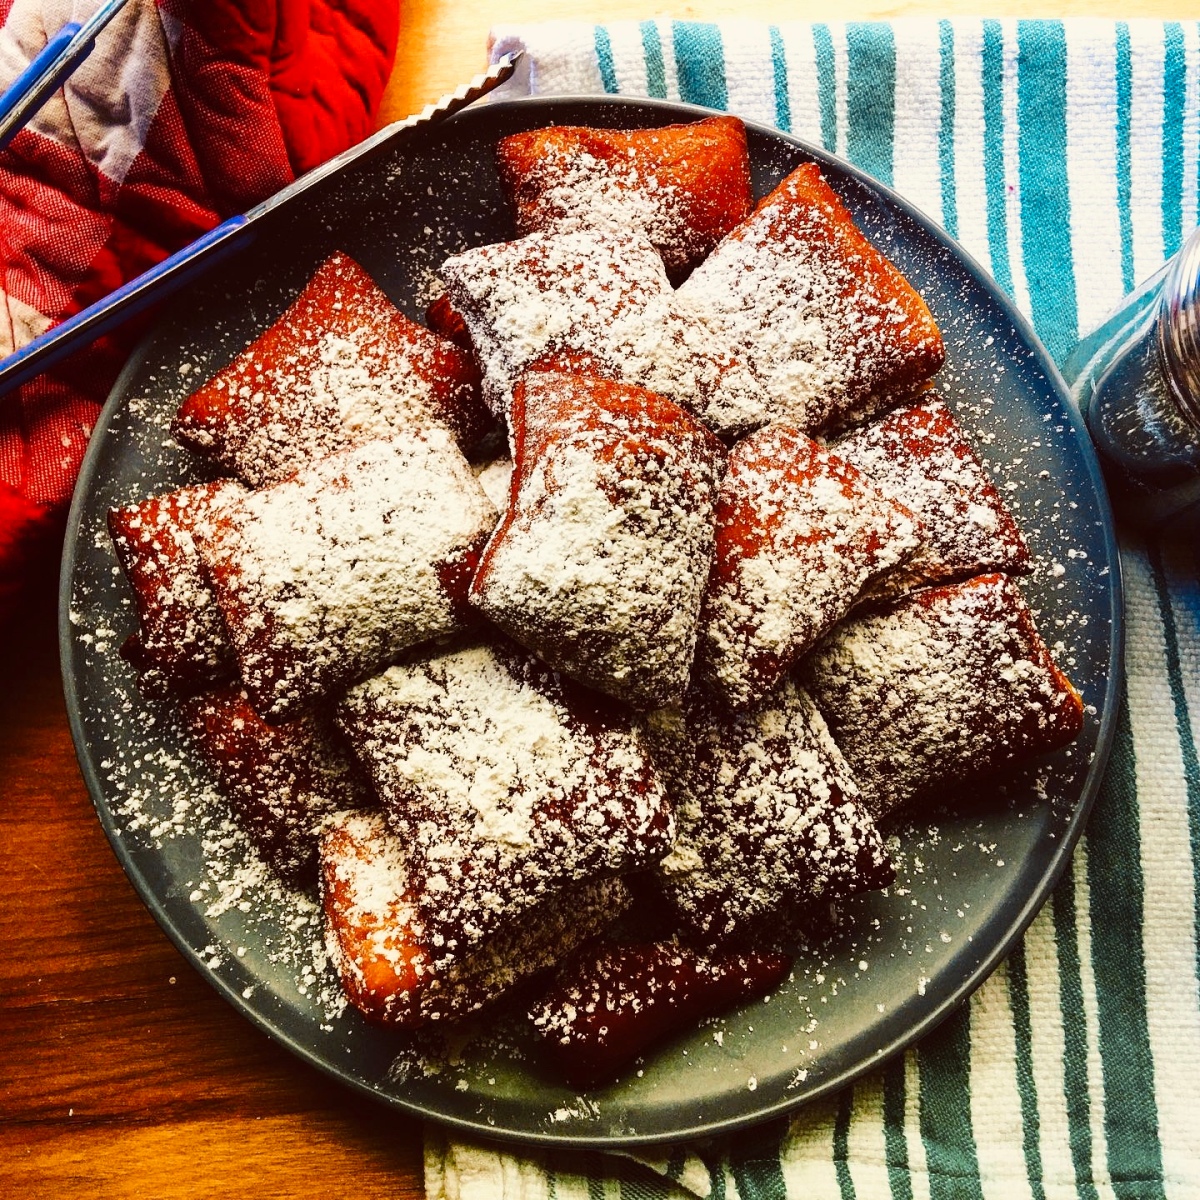 So I learned to bake – Madeleines, Scones, Cannoli, and Beignets